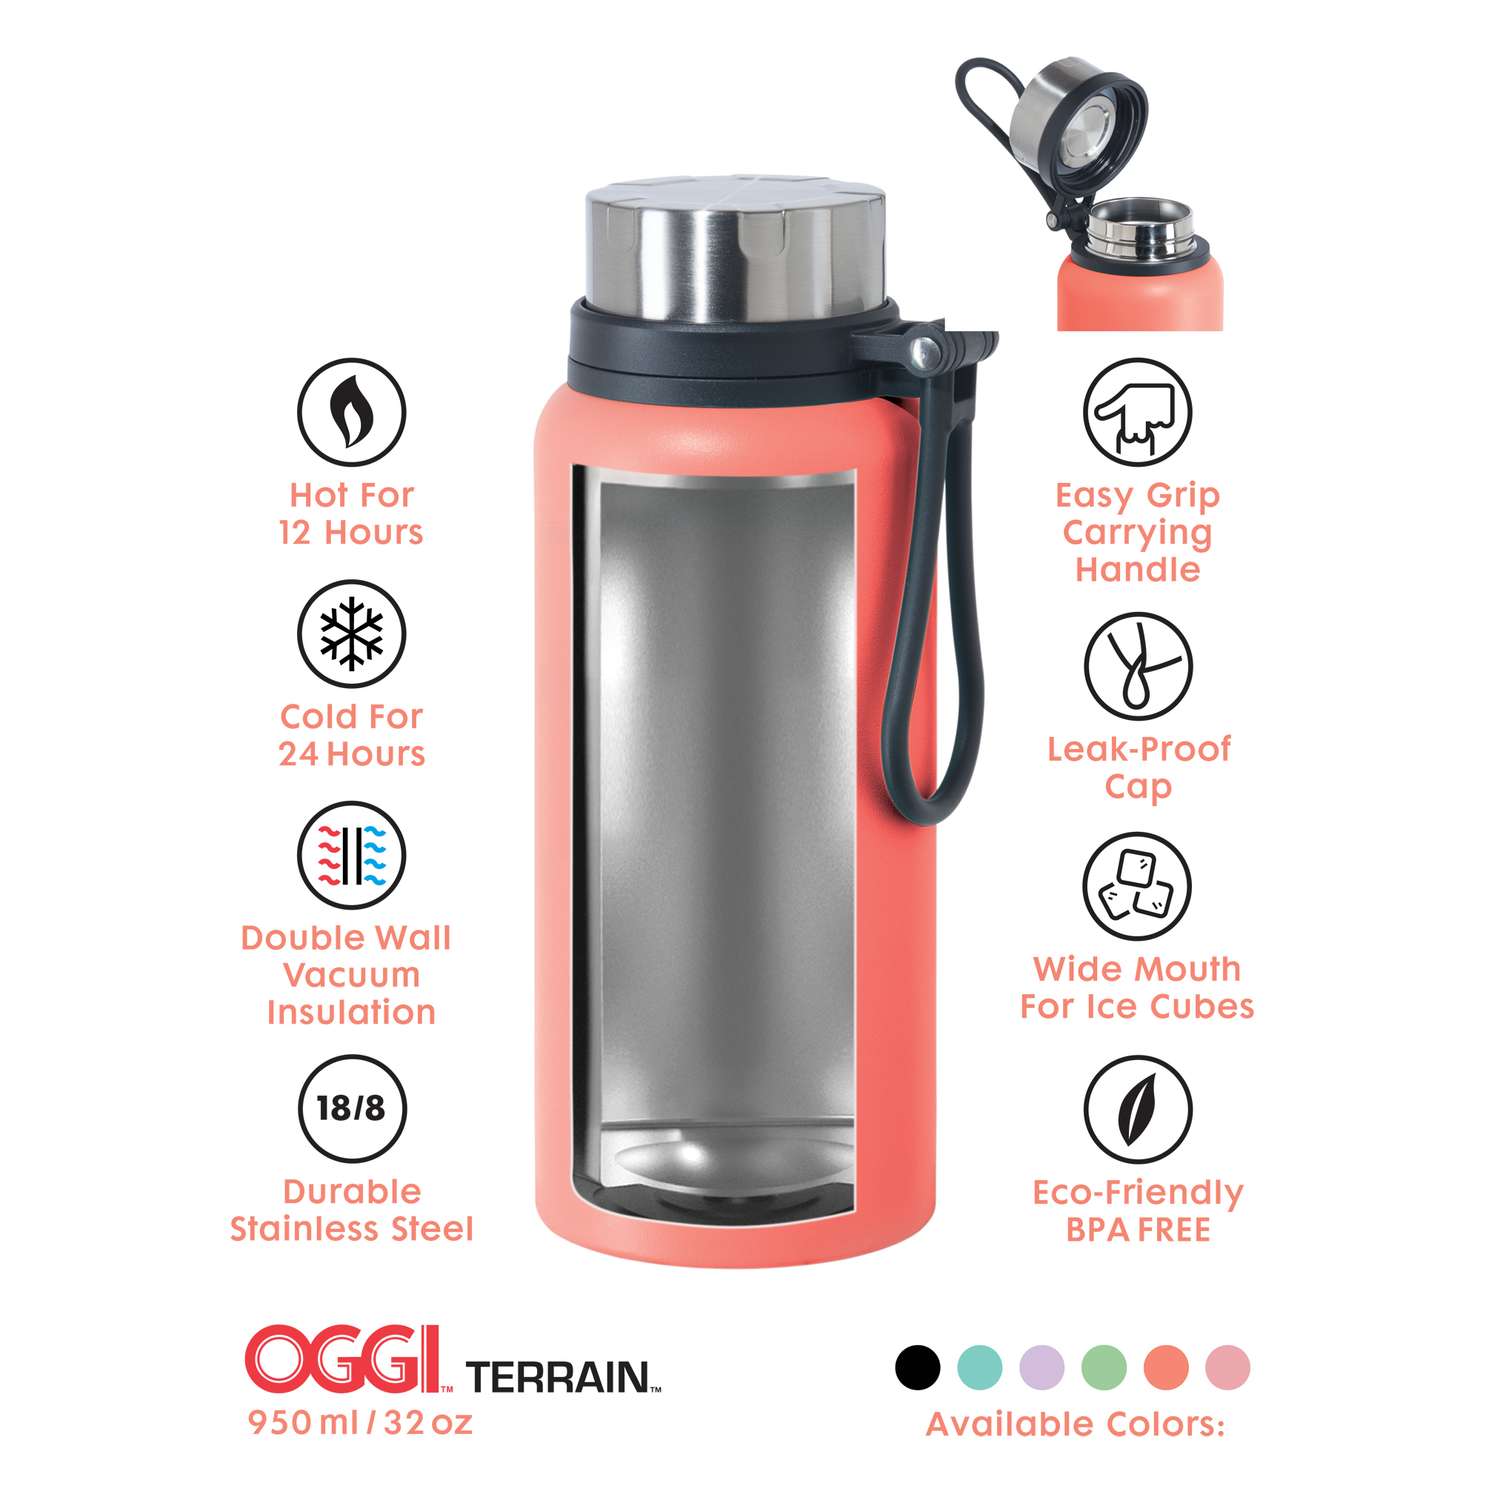 Stainless Steel Insulated 24 Hour Hot & Cold Bottle Color Green